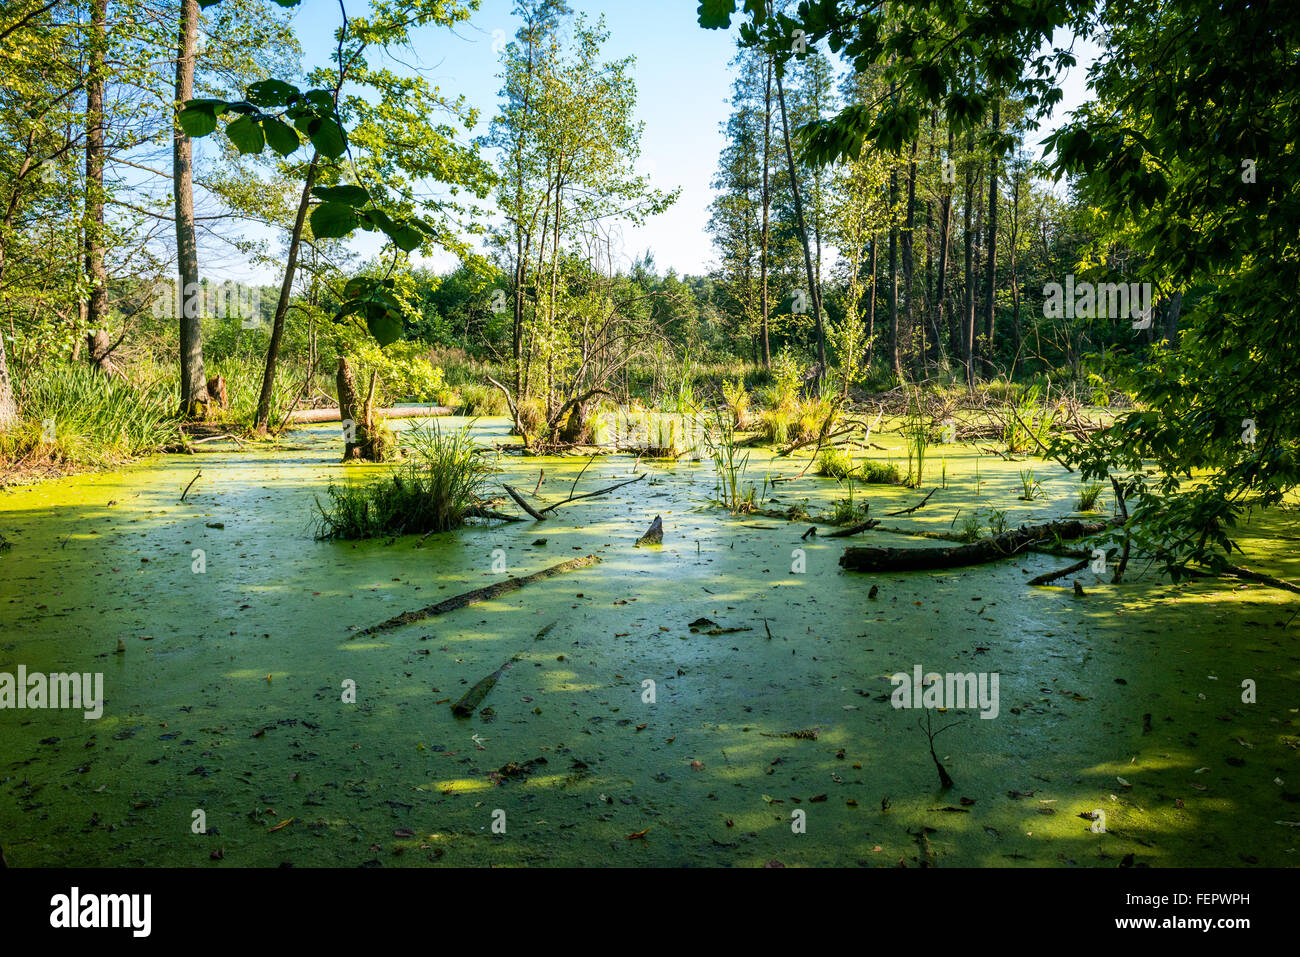 A freshwater marsh in a forest next to Klevan, Rovno Region, Ukraine Stock Photo